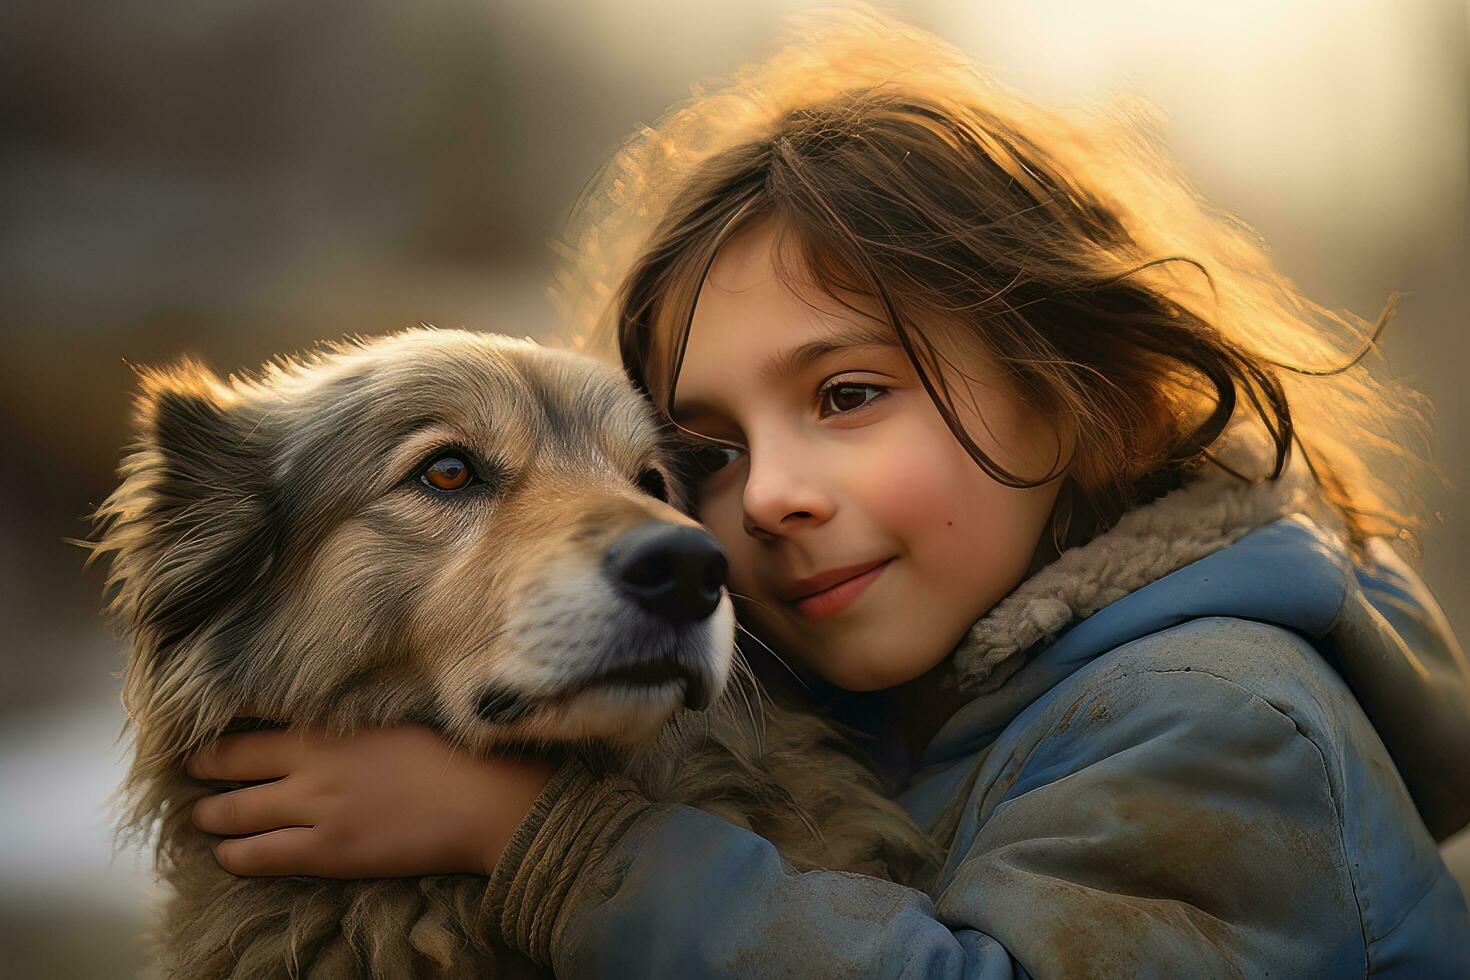 Little Girl Hugging her Dog with Warm Light Background, Kid Hugs a Stray Dog to Conveying a Sense of Love. photo